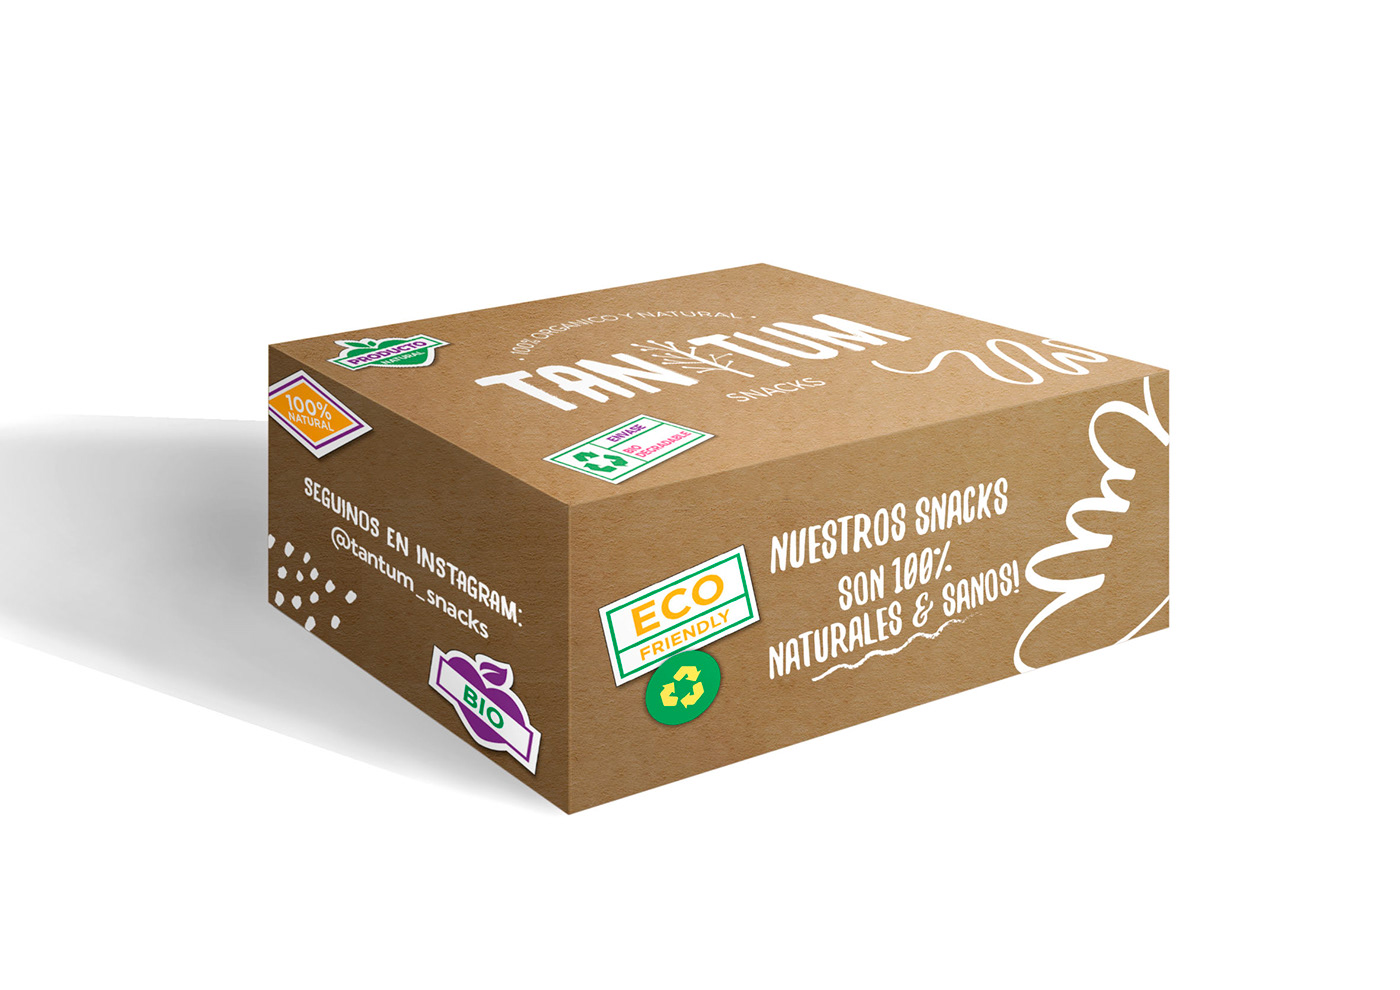 packaging design brand identity Social media post Graphic Designer snack packaging saludable healthy natural identity